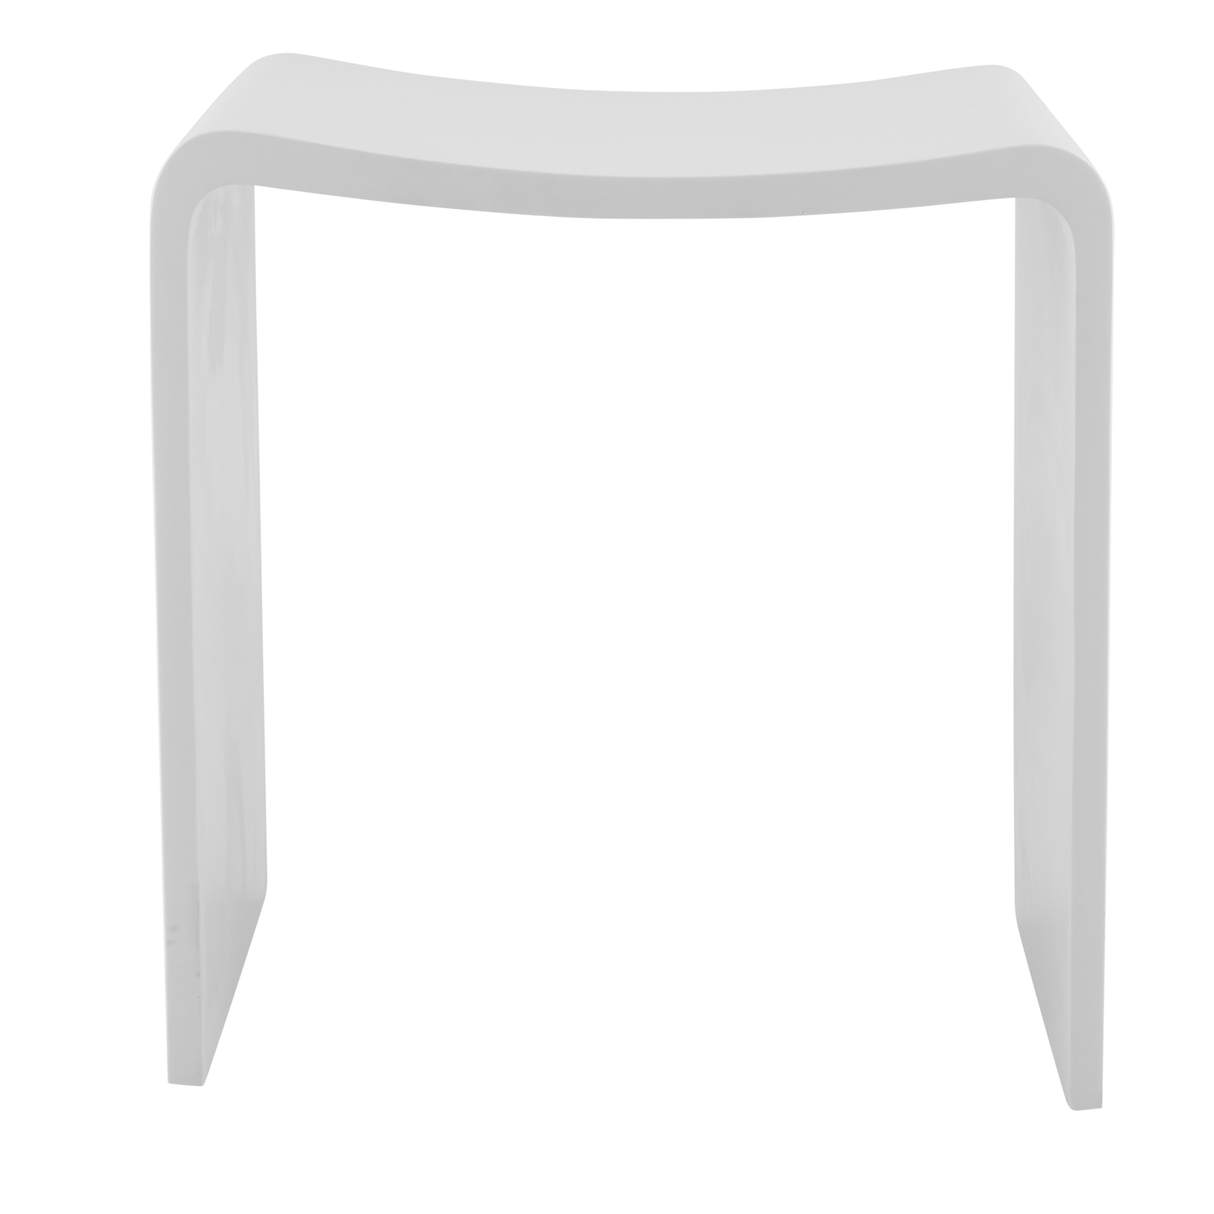 DAX Solid Surface Bathroom Stool,  Matte White Finish, 15-3/4 x 17-1/8 x 11-13/16 Inches (DAX-ST-02) DAX-ST-02